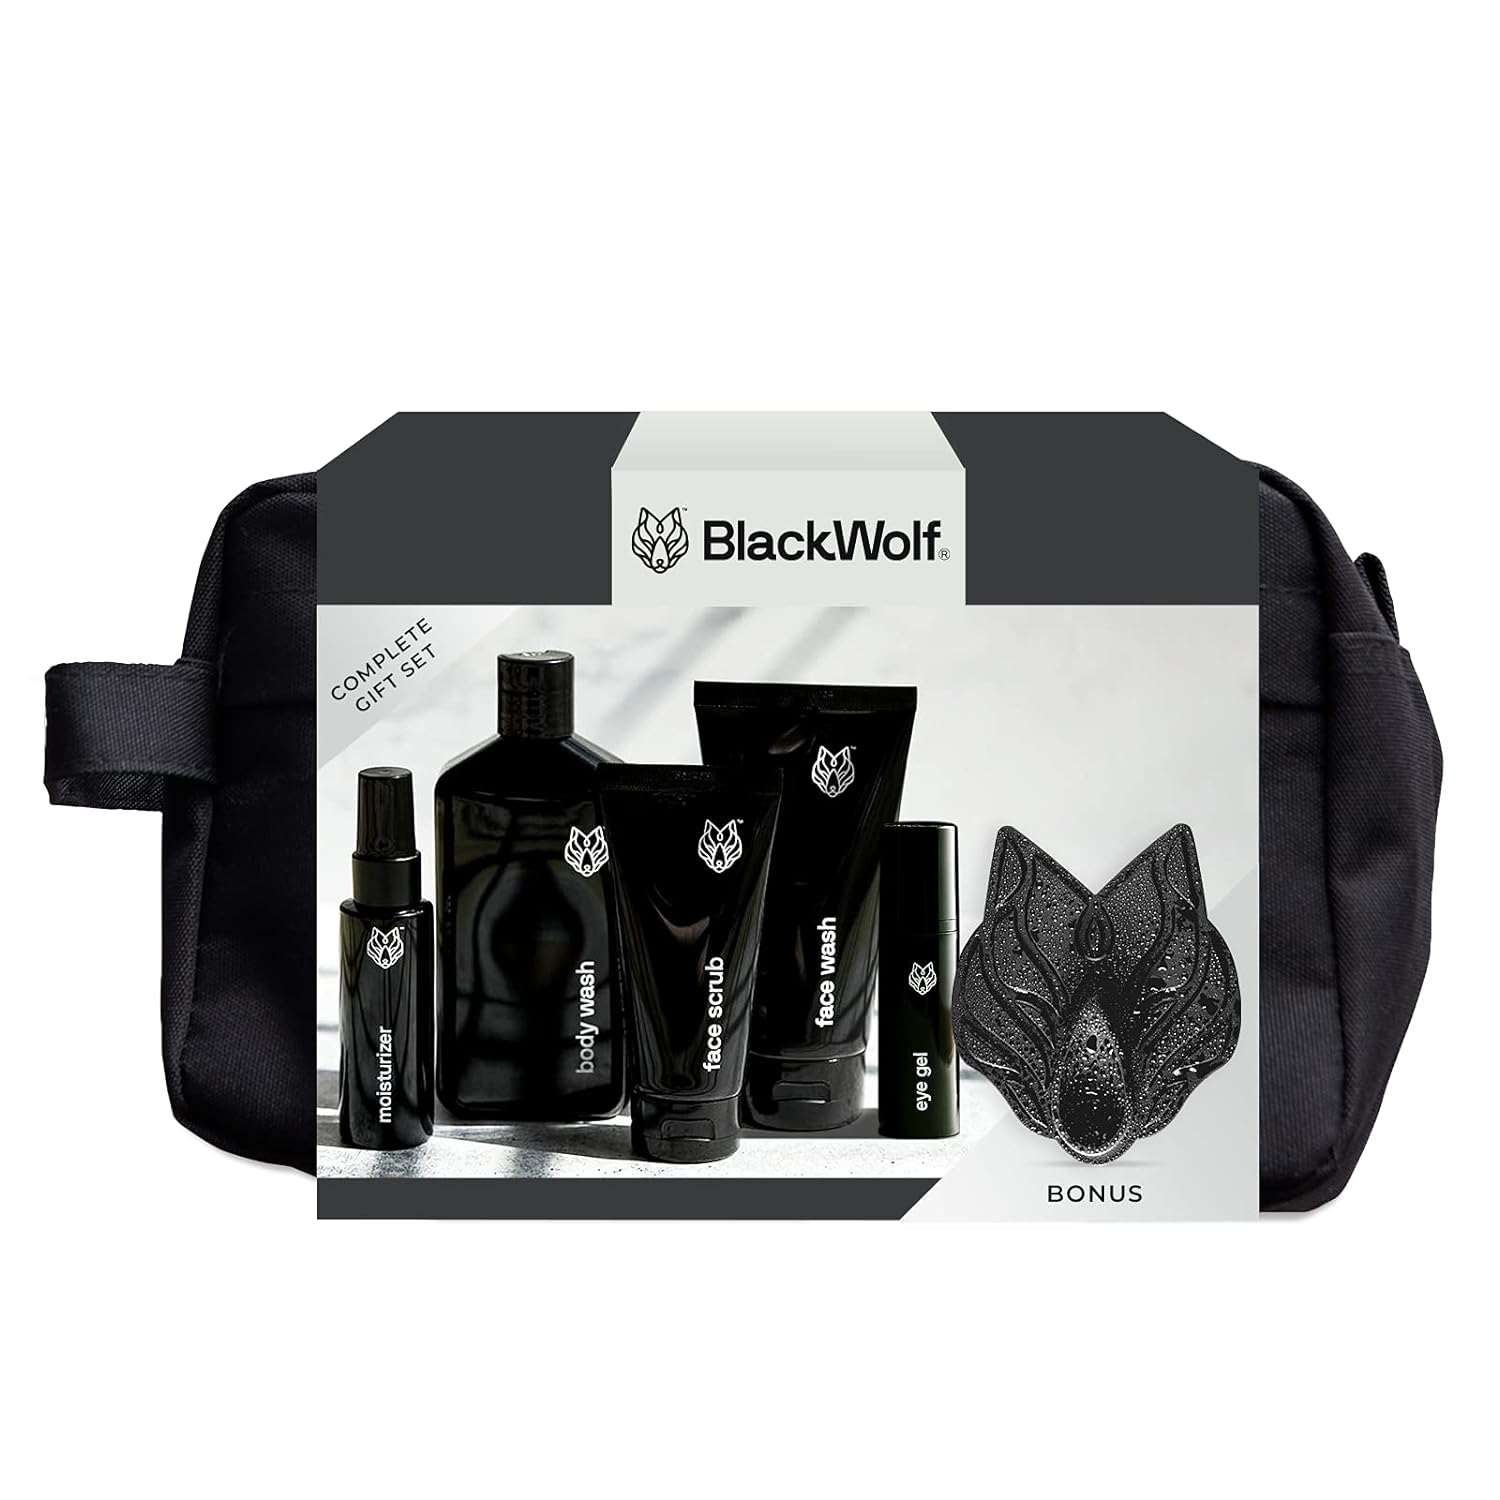 Black Wolf 7pc Gift Set for Oily Skin- Includes Our Men's Face Wash, Face Scrub, Body Wash, Moisturizer, Eye Gel, Scrubber and Toiletry Bag- Charcoal Powder and Salicylic Acid Reduce Acne Breakouts